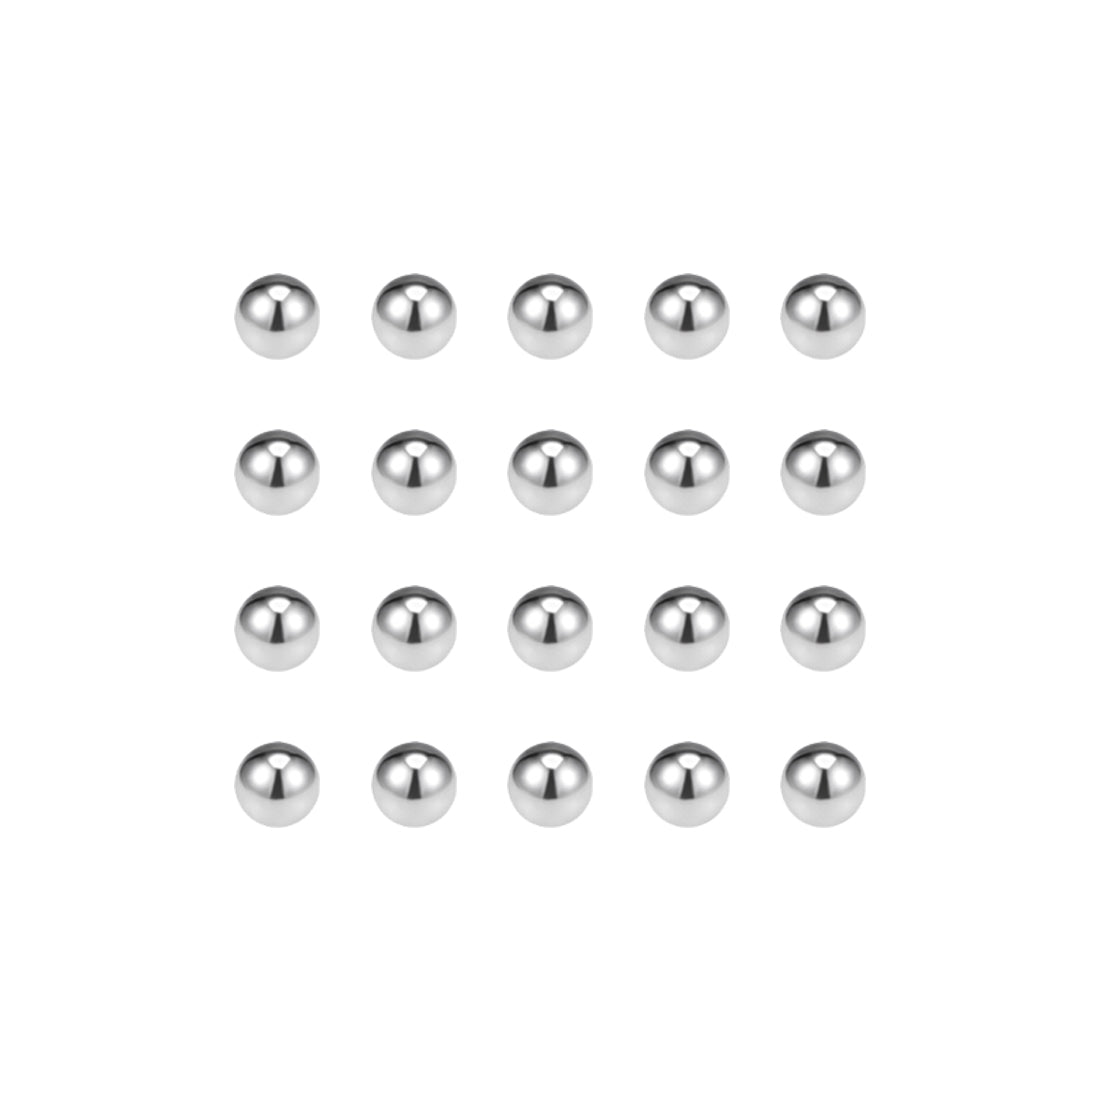 Uxcell Uxcell 4.5mm Bearing Balls 304 Stainless Steel G100 Precision Balls 200pcs